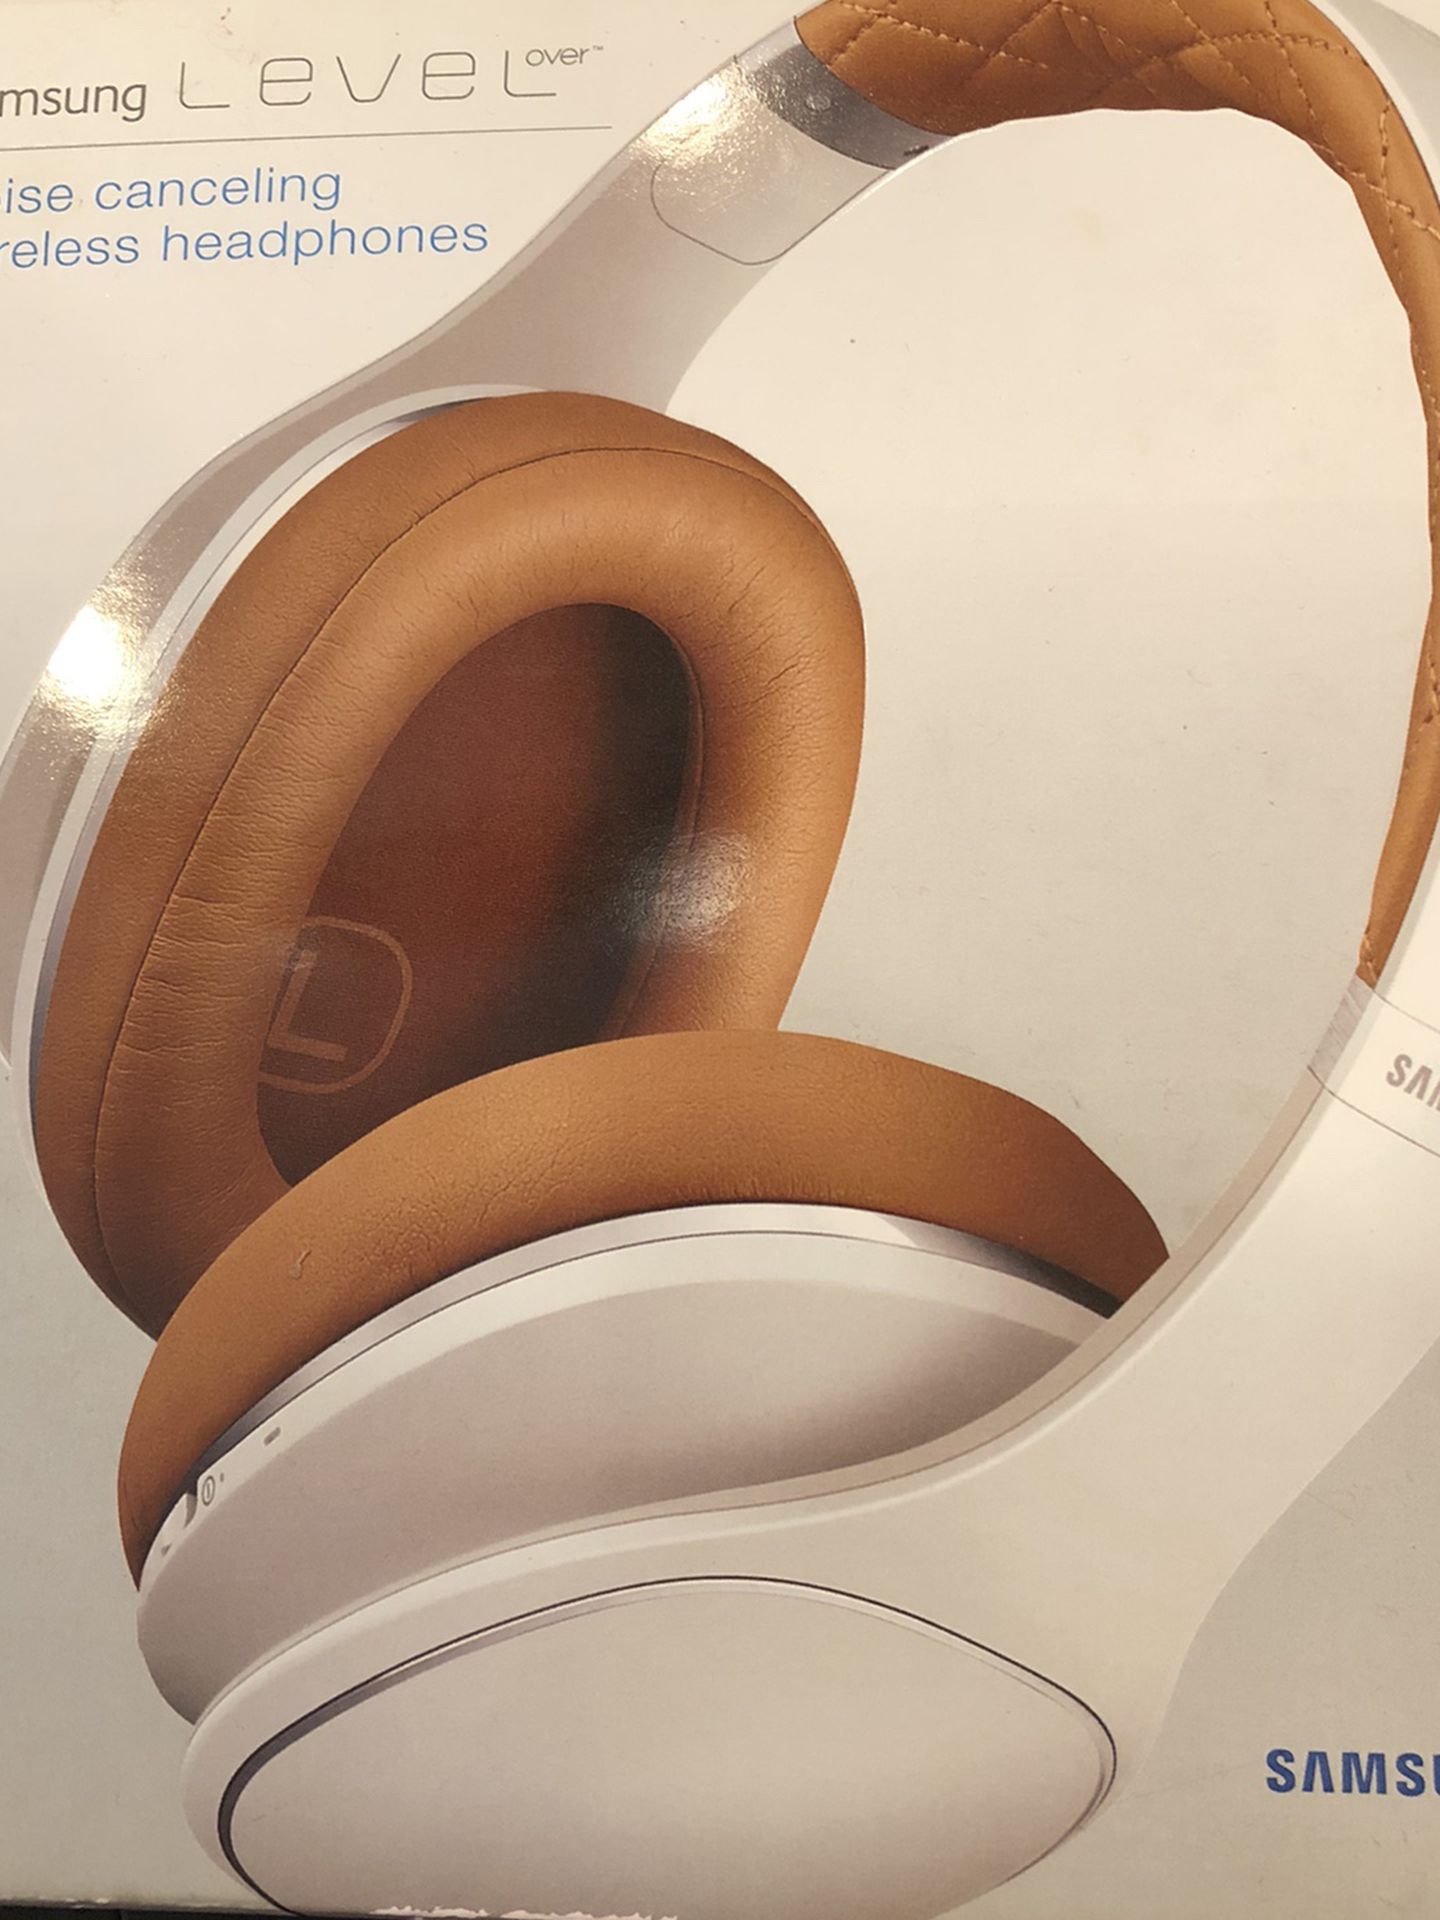 Samsung Level Over Noise Cancelling IWireless Headphones